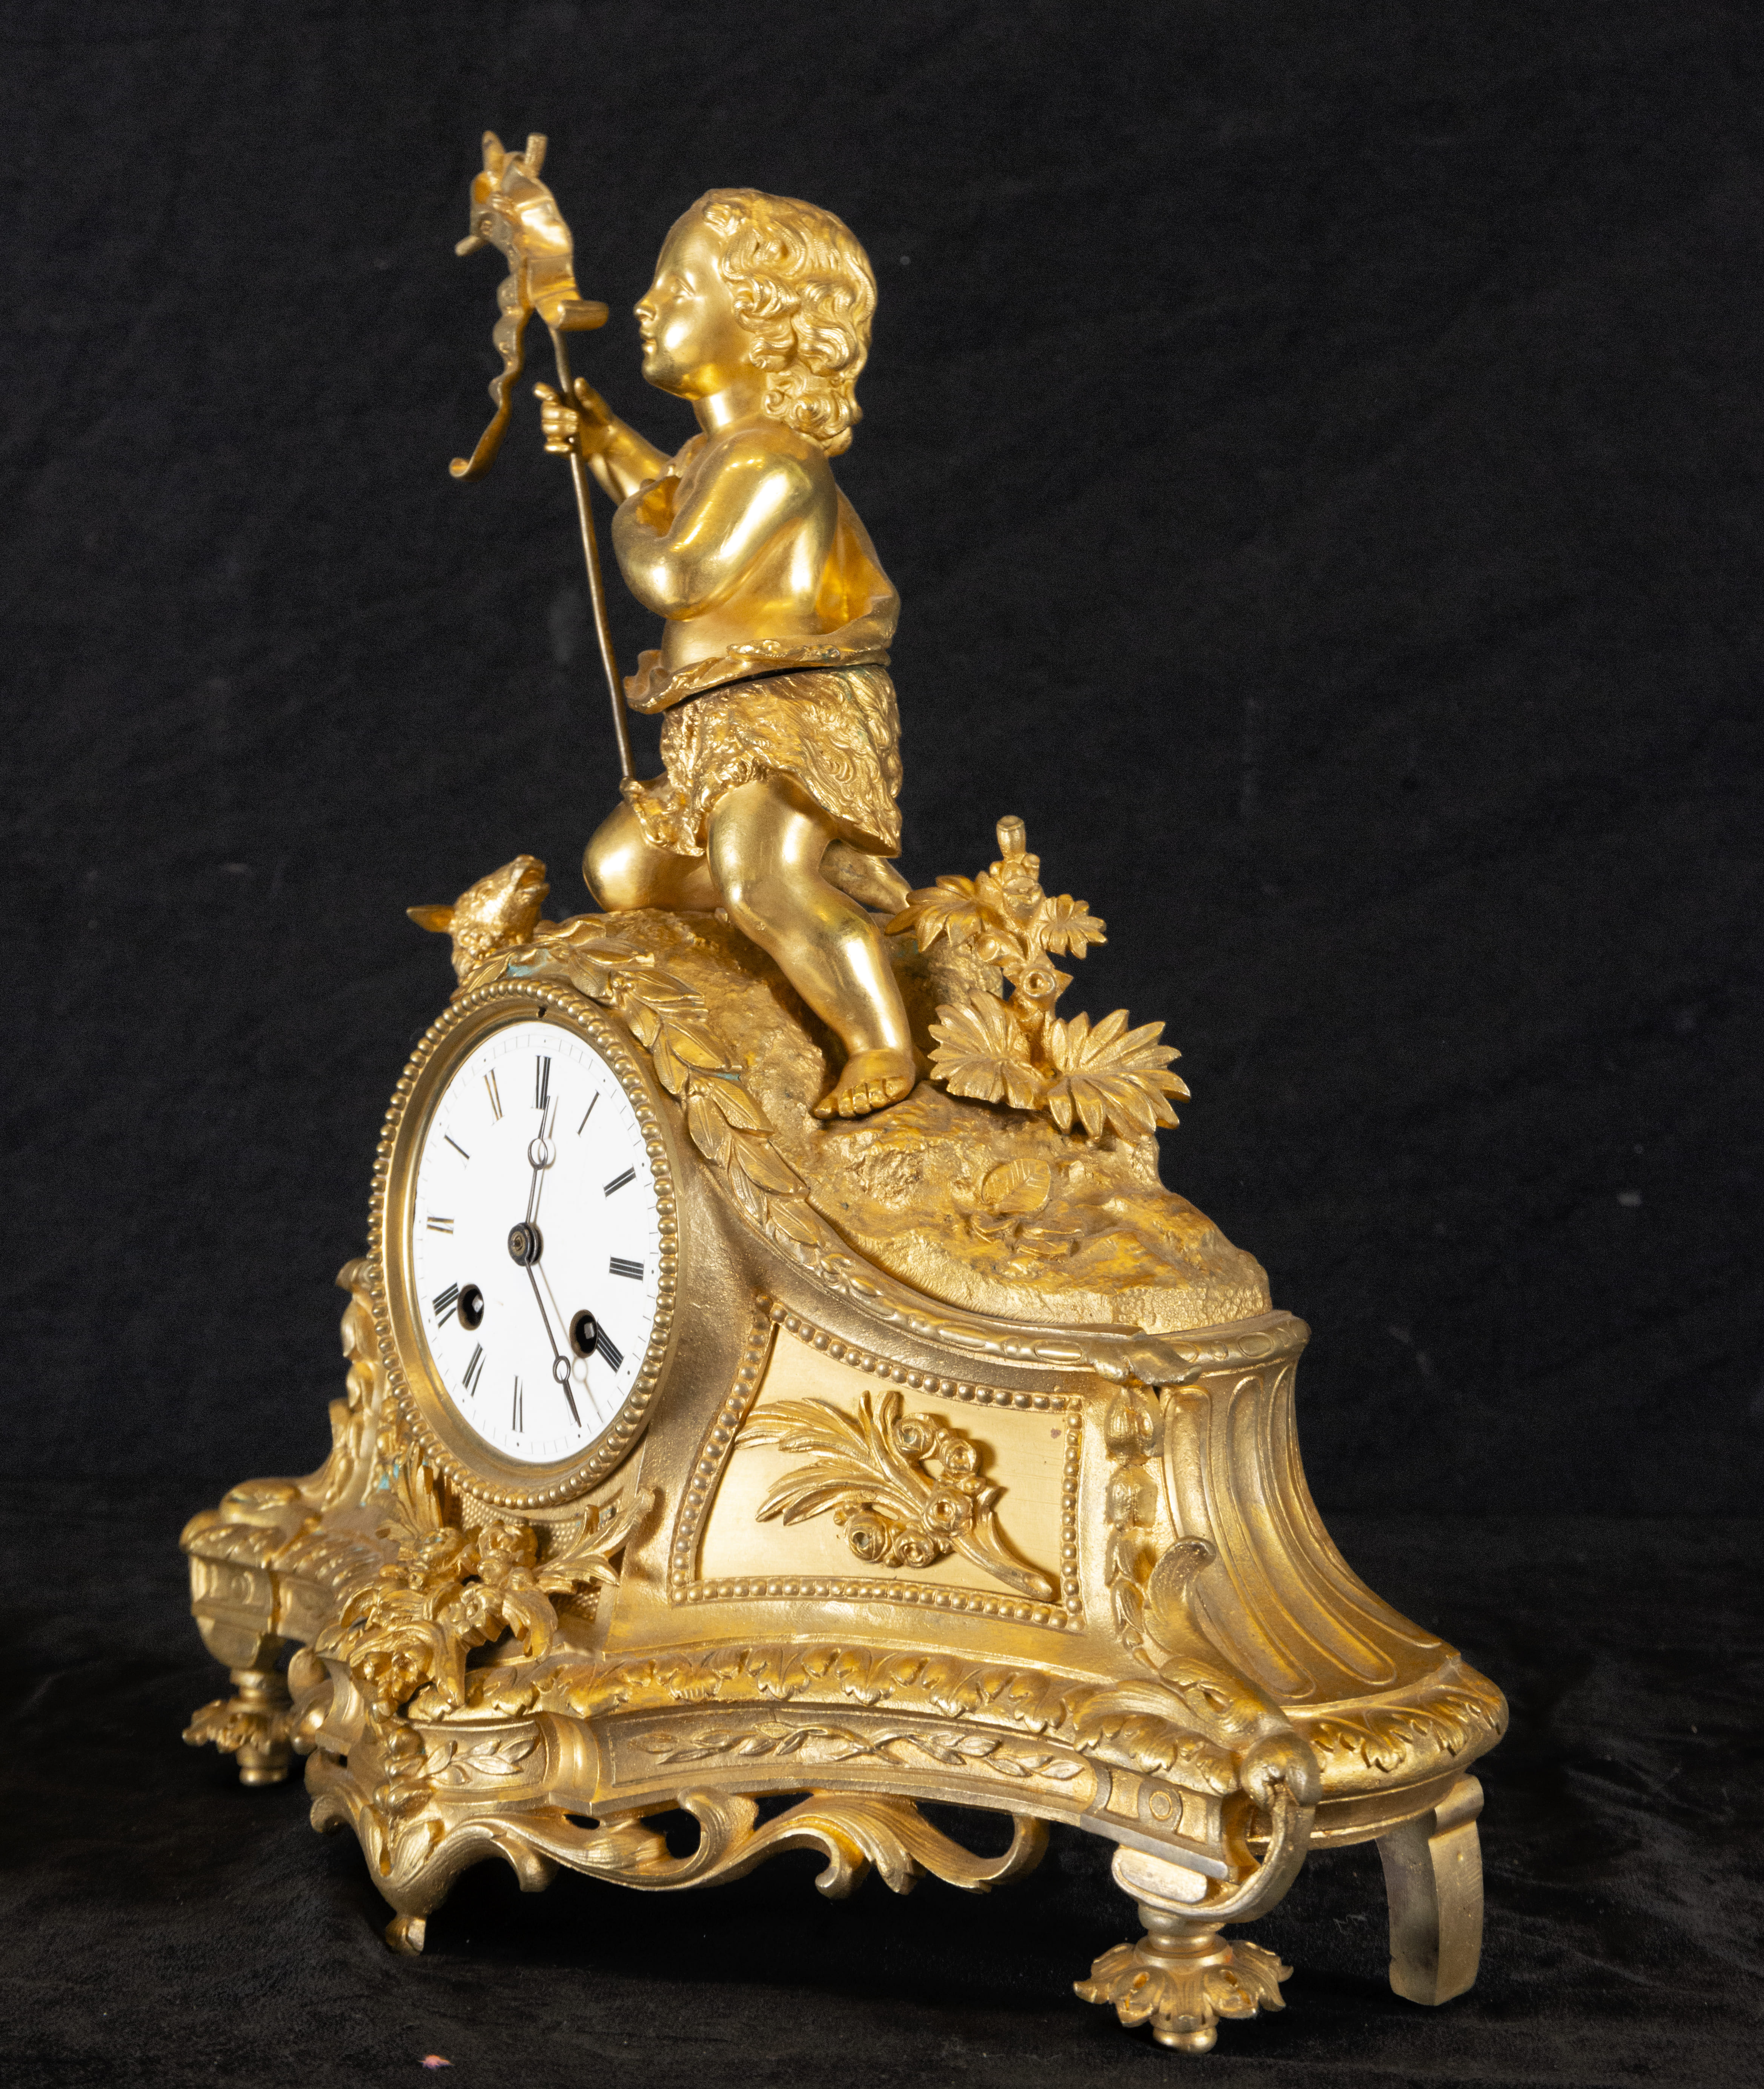 Complete French garrison in mercury gilt bronze in Louis XV style, 19th century French work - Image 5 of 7